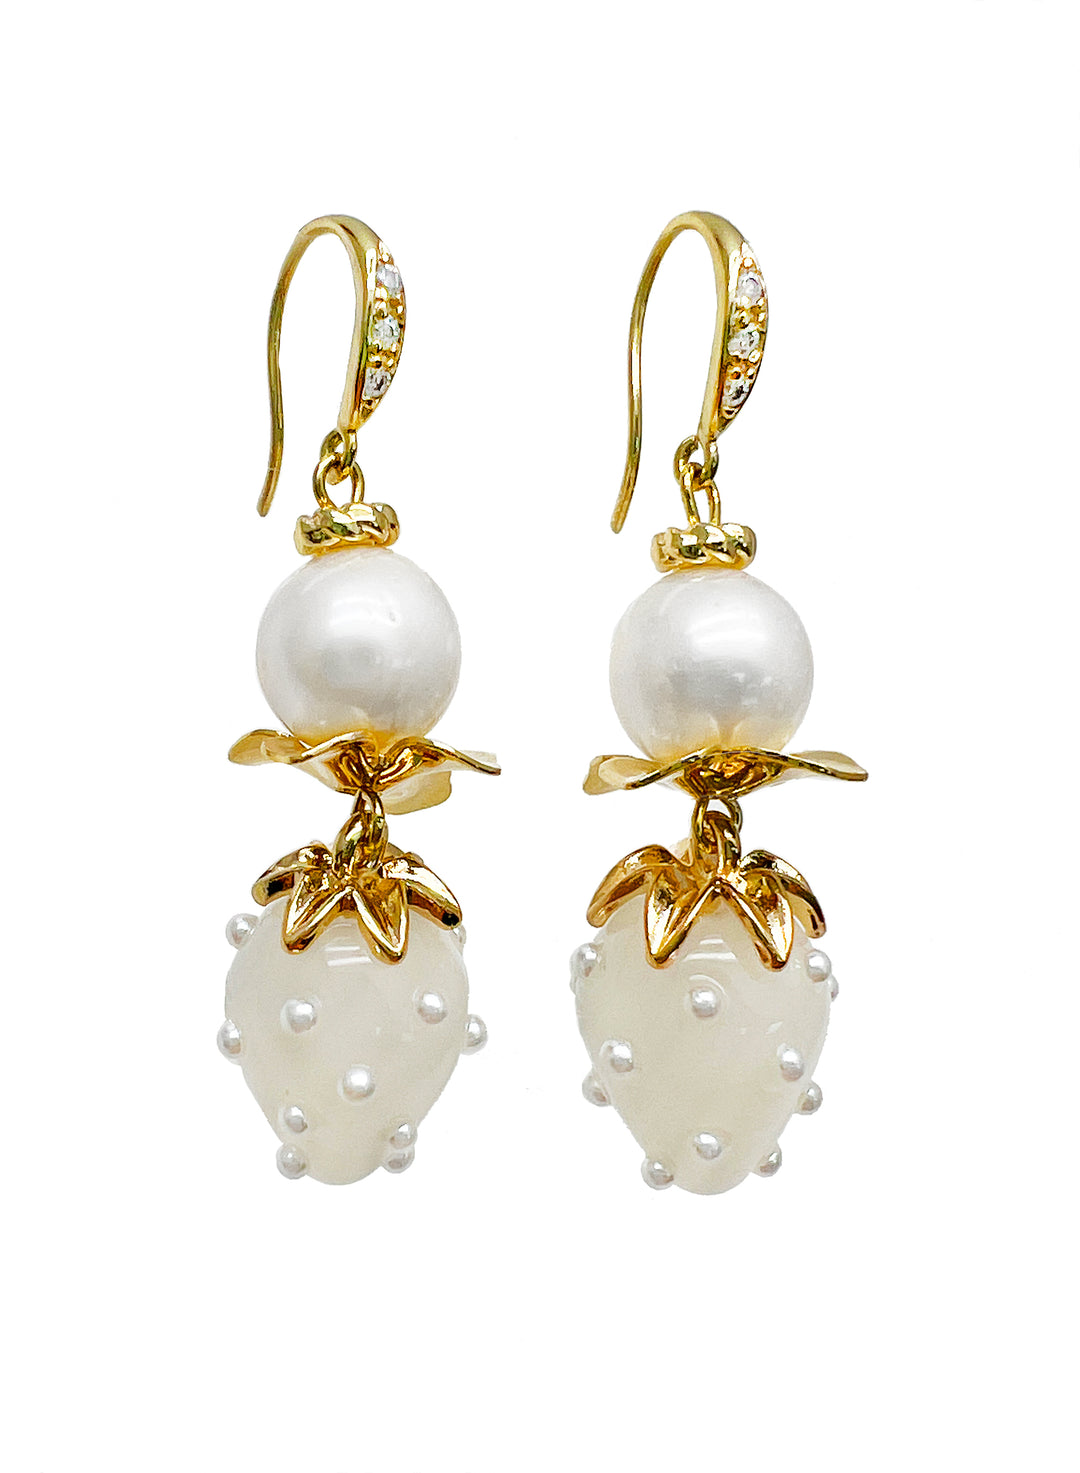 Freshwater Pearls with White Strawberry Earrings JE031 - FARRA